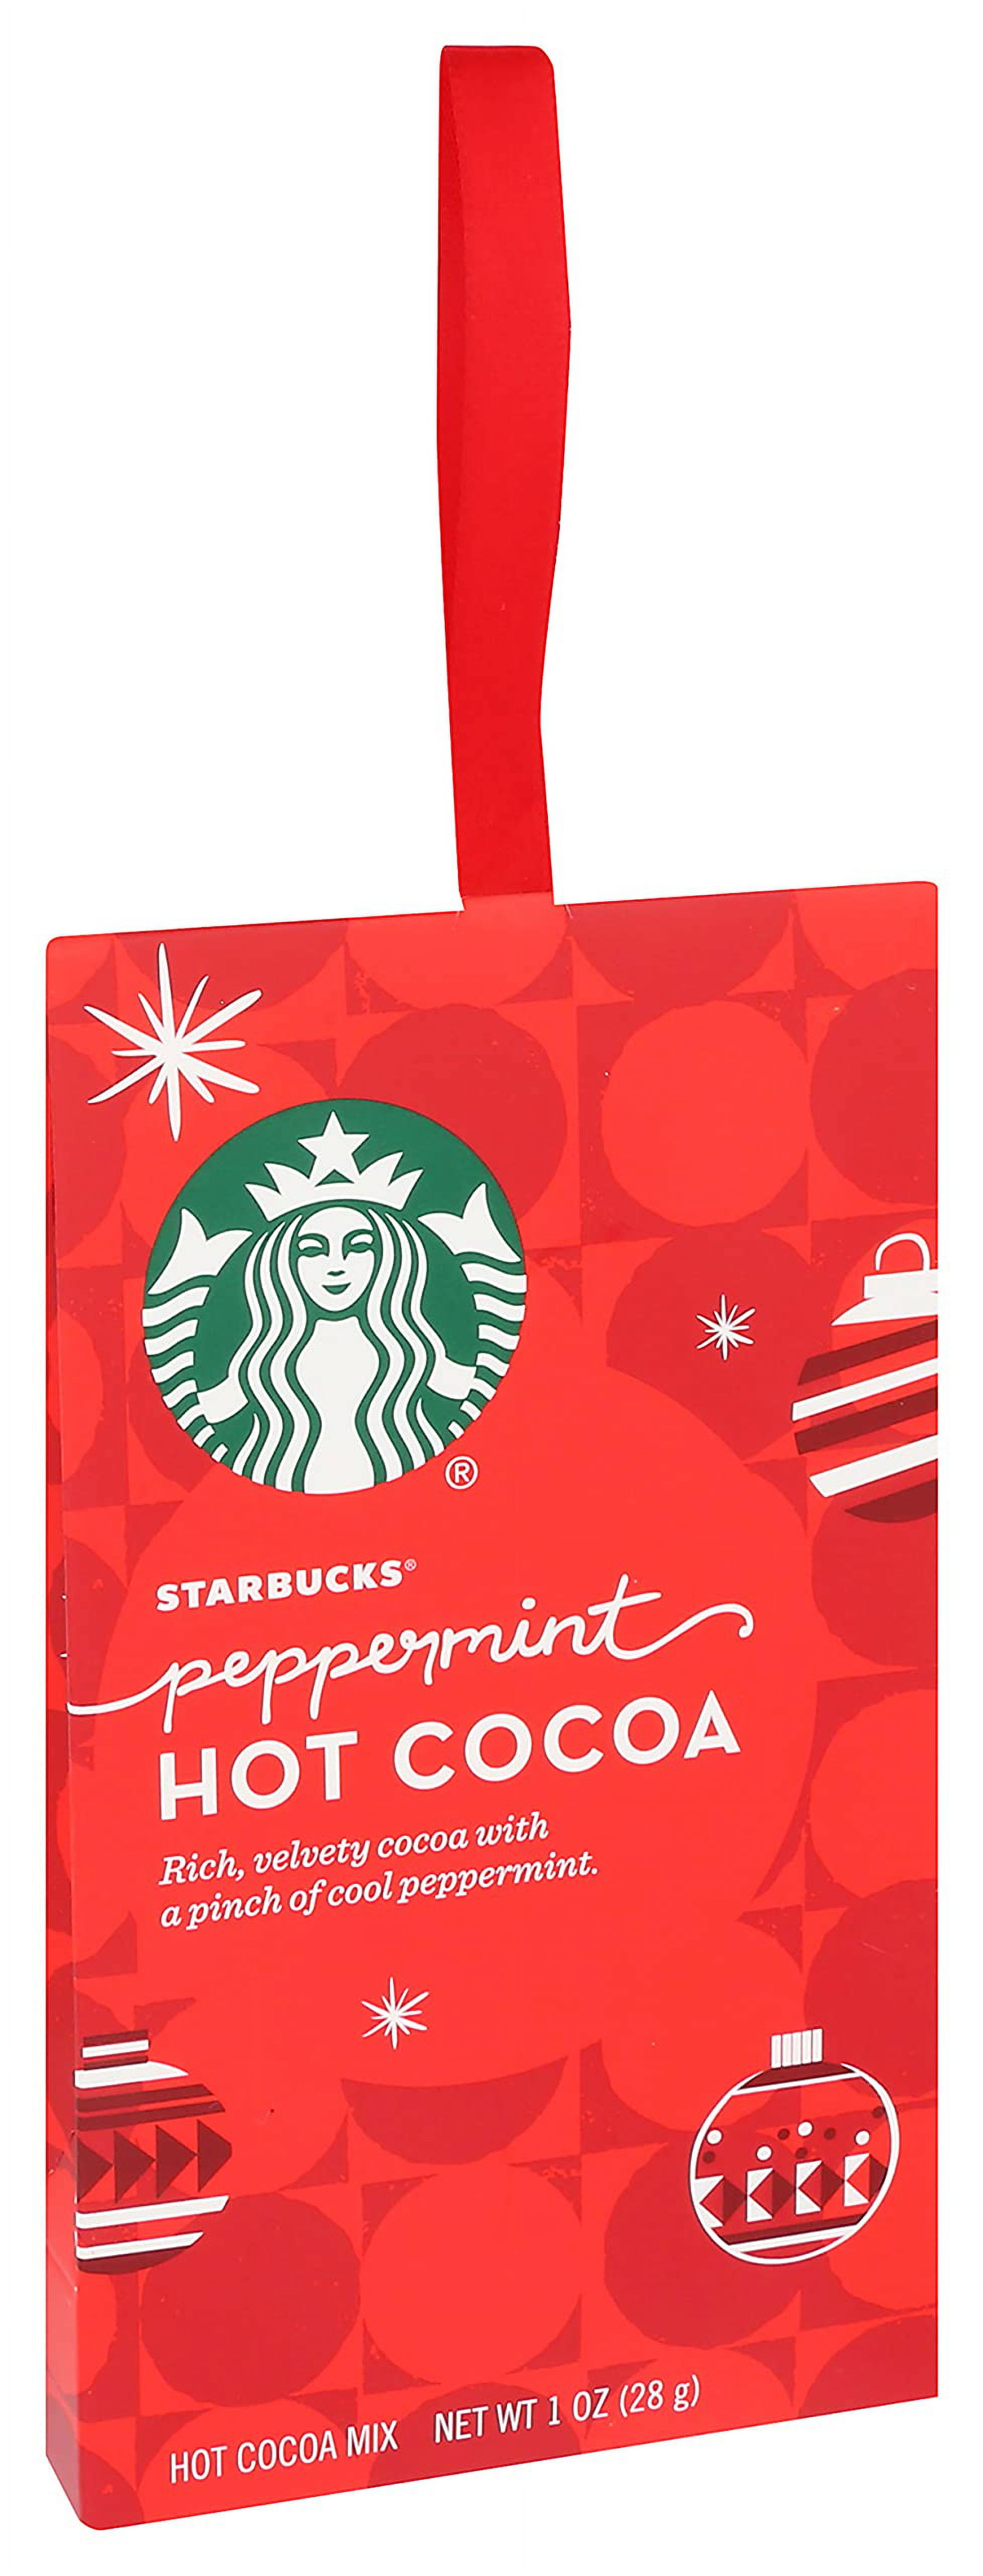 Walmart Is Selling Starbucks Cup Ornaments Filled With Hot Cocoa Mix